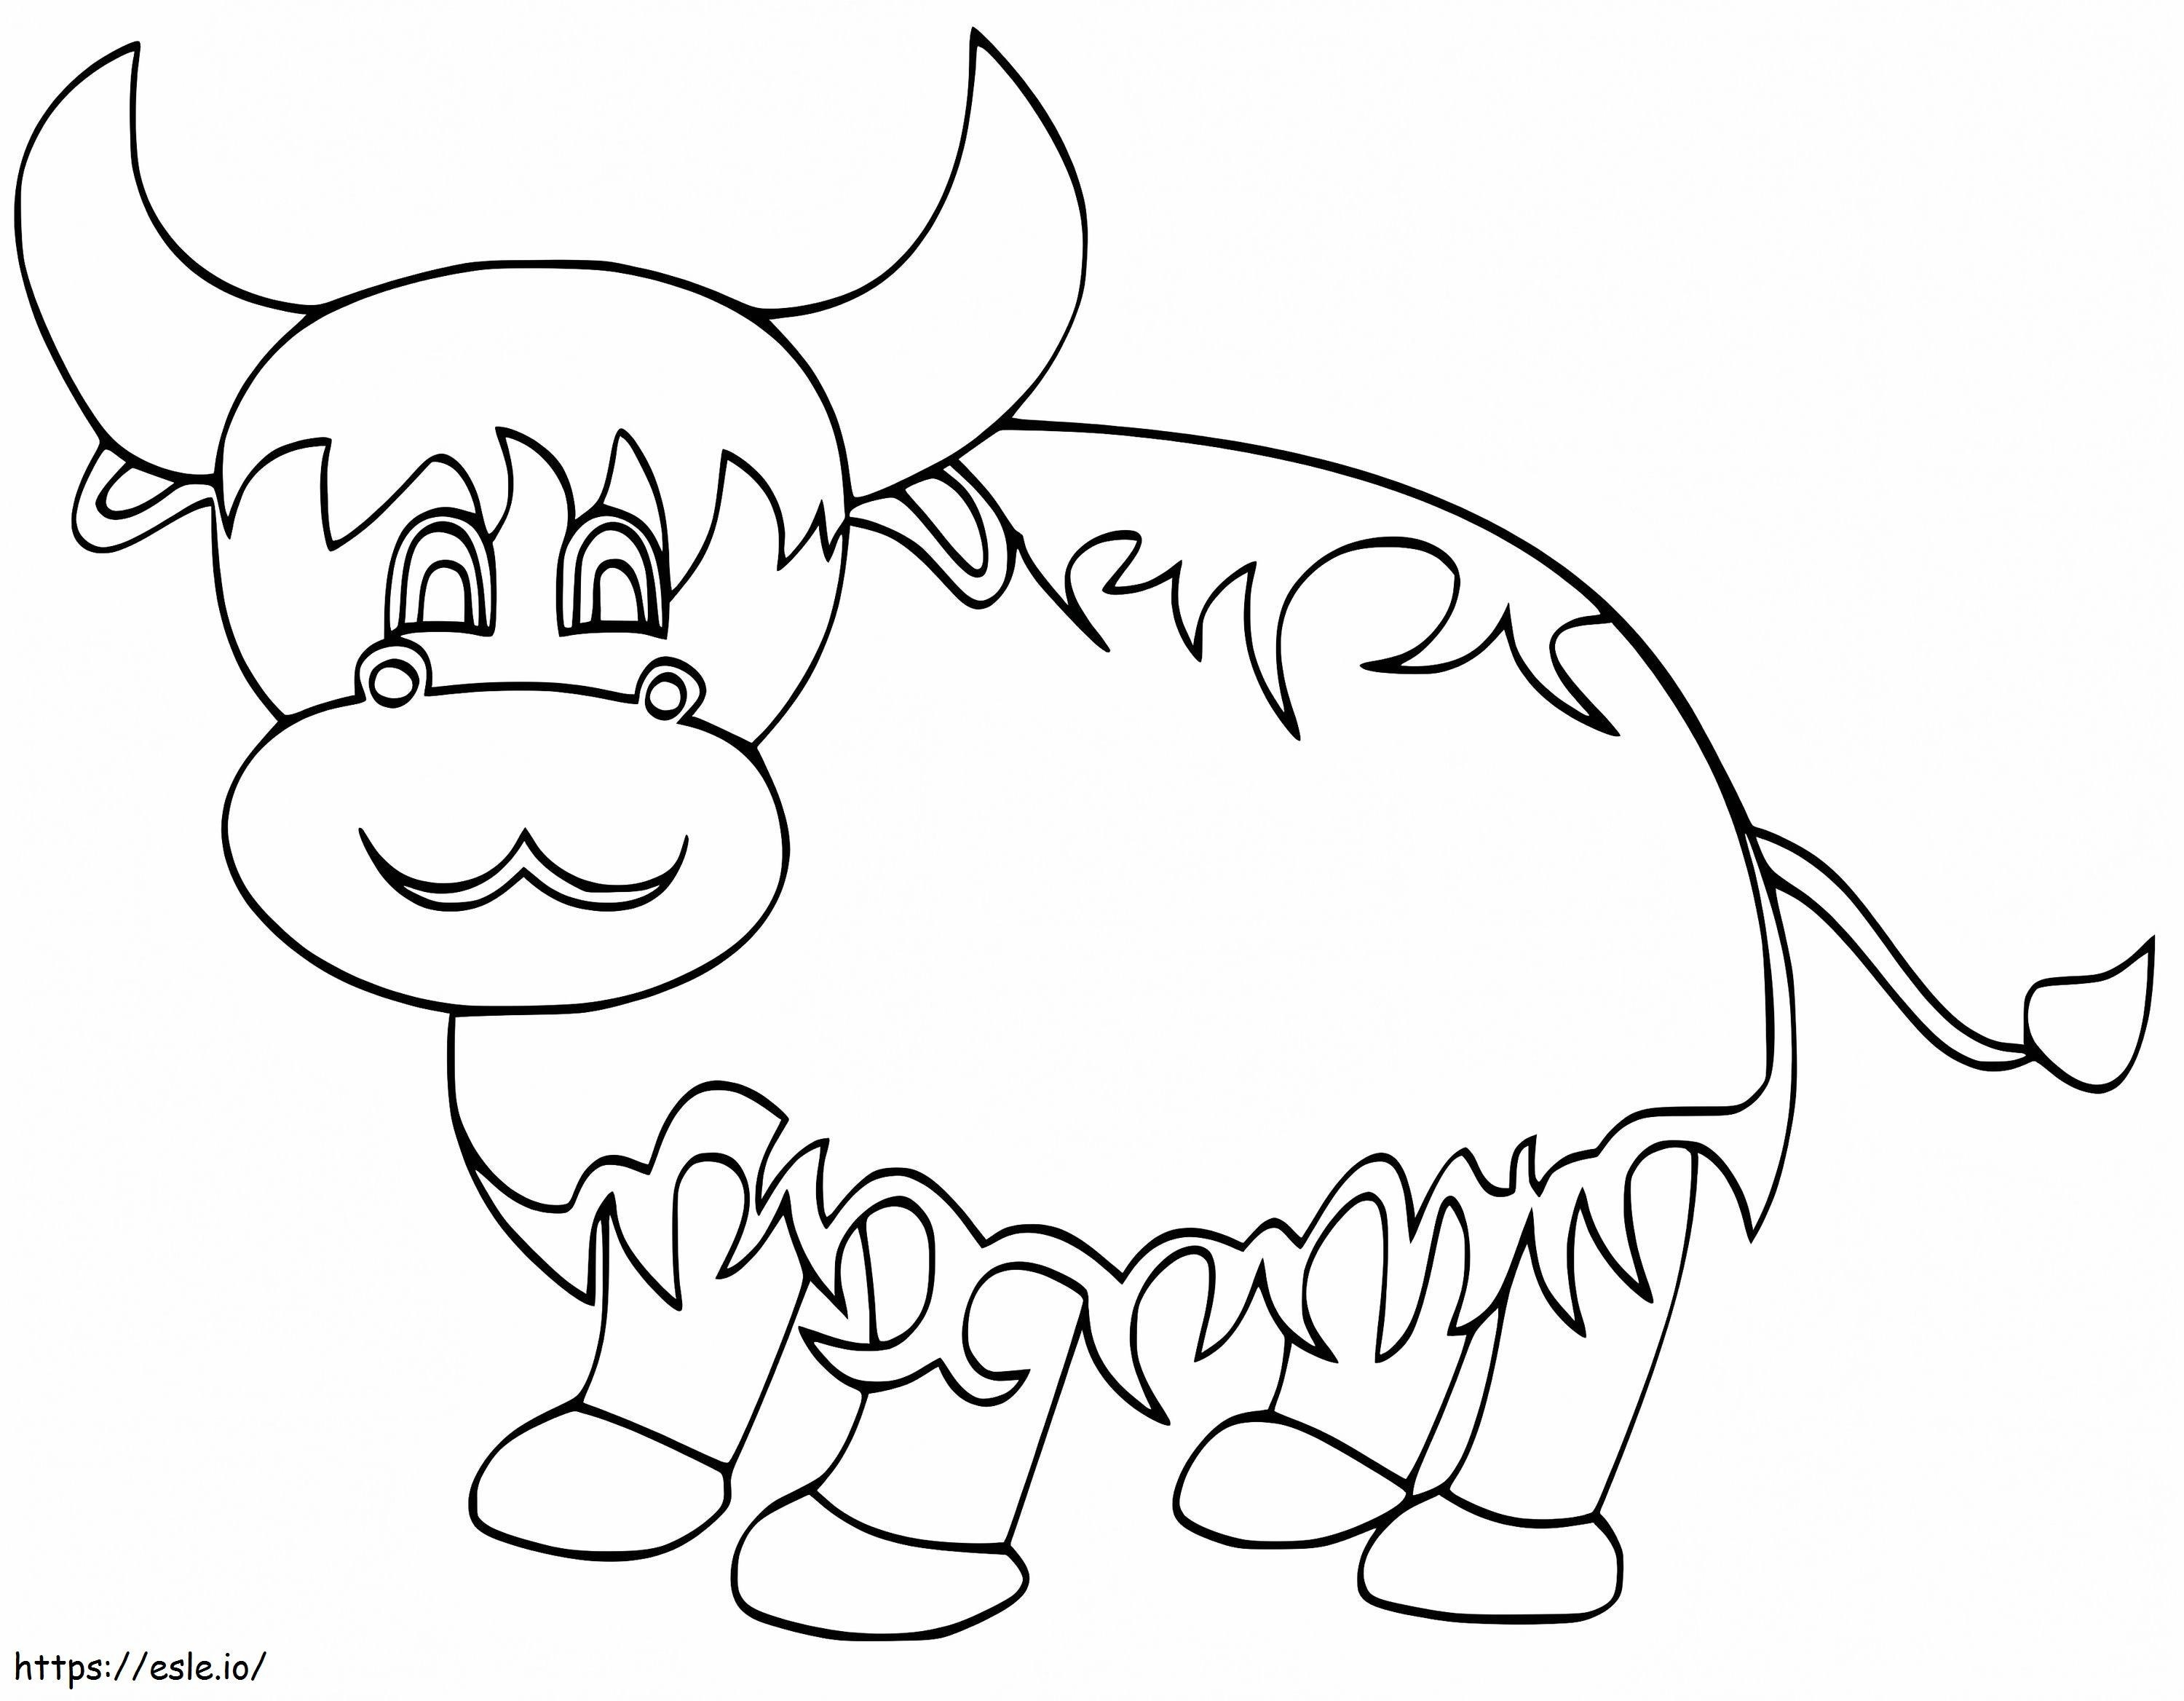 A Funny Yak coloring page